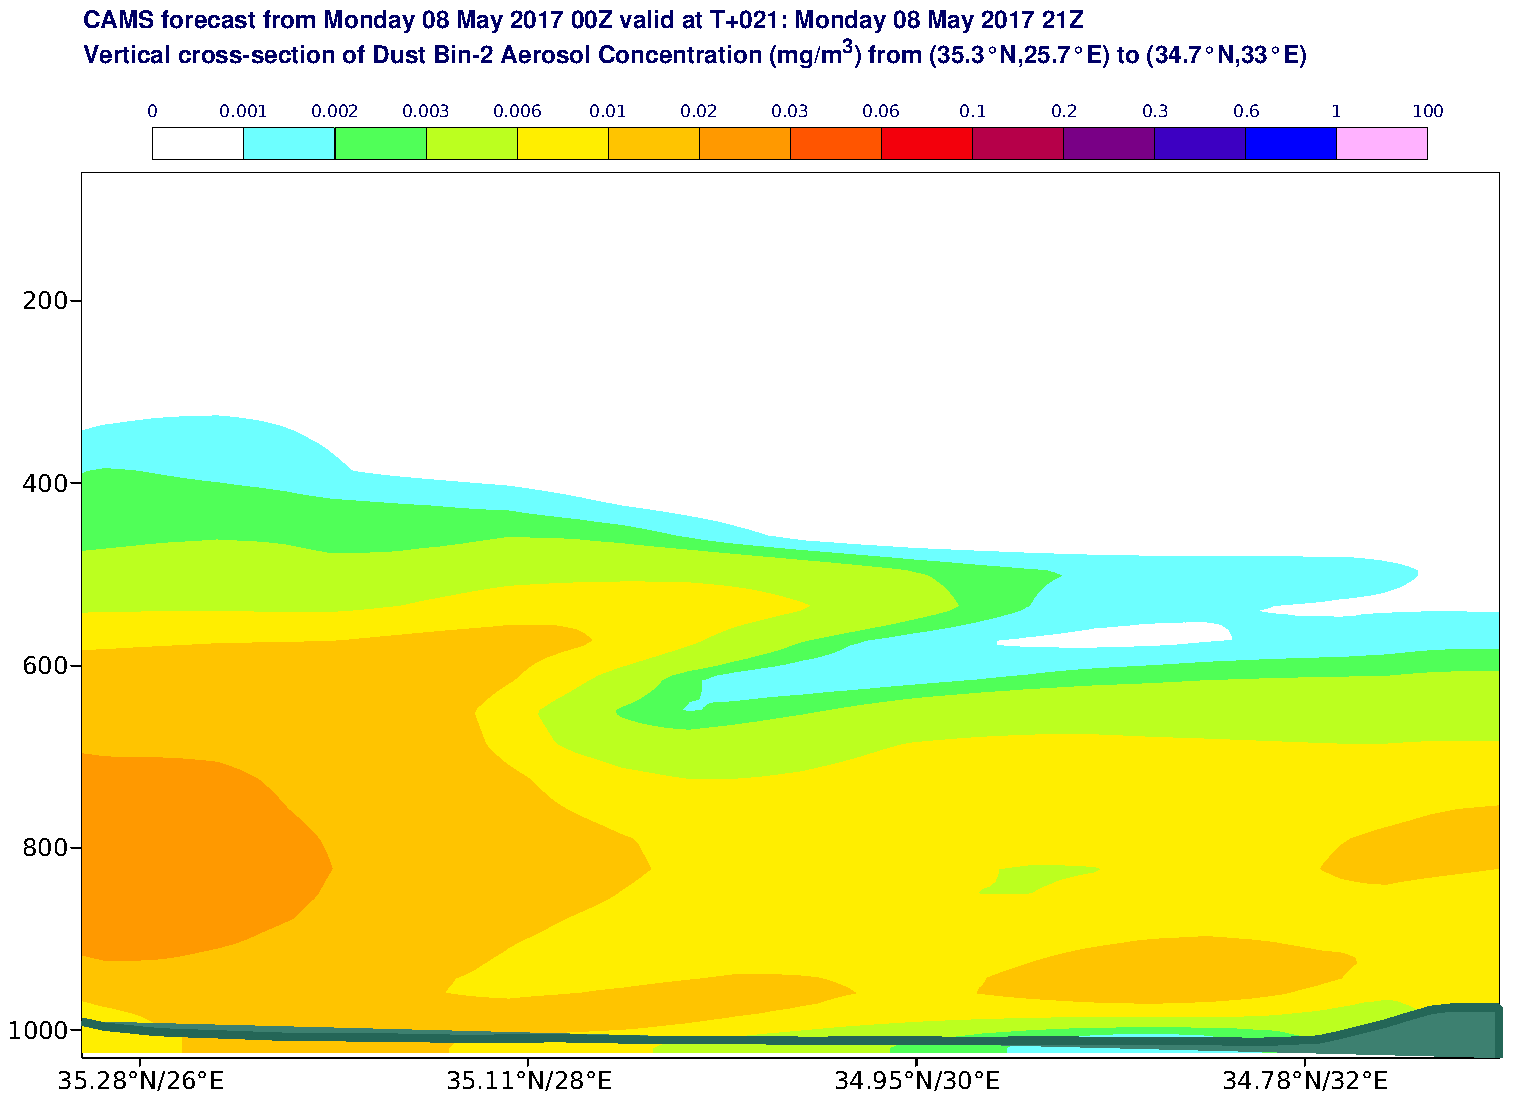 Vertical cross-section of Dust Bin-2 Aerosol Concentration (mg/m3) valid at T21 - 2017-05-08 21:00